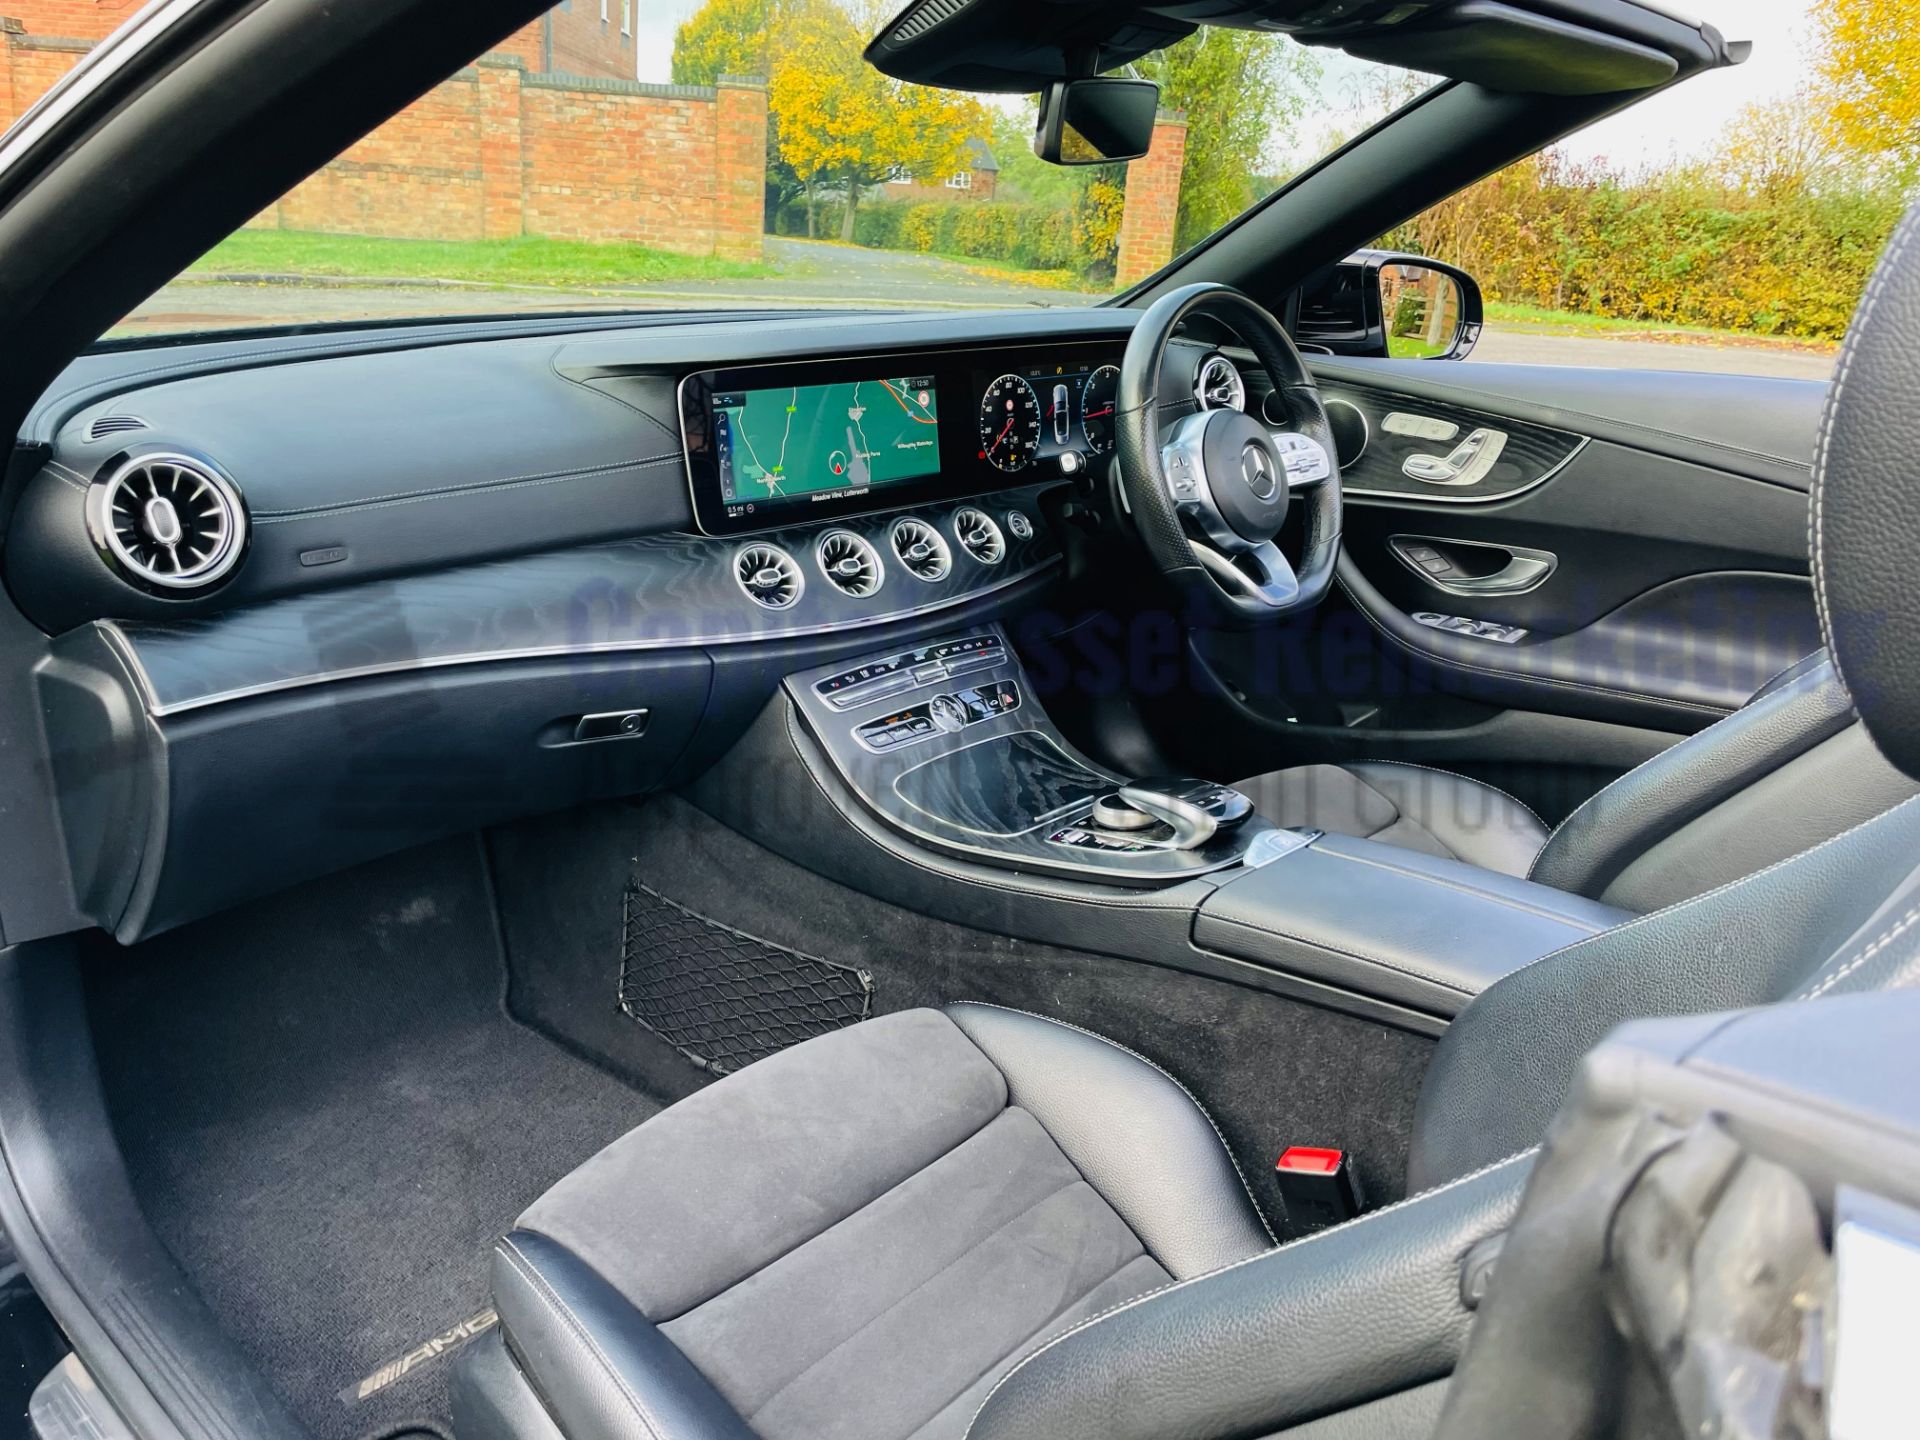 MERCEDES-BENZ E220d *AMG LINE - CABRIOLET* (2019 - EURO 6) '9G TRONIC AUTO - SAT NAV' *FULLY LOADED* - Image 38 of 66